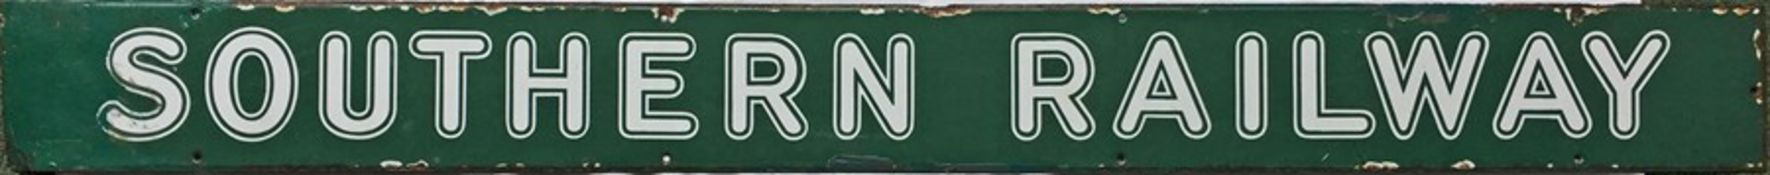 Southern Railway enamel POSTER BOARD HEADER PLATE in the rounded-style 'sunshine' lettering.